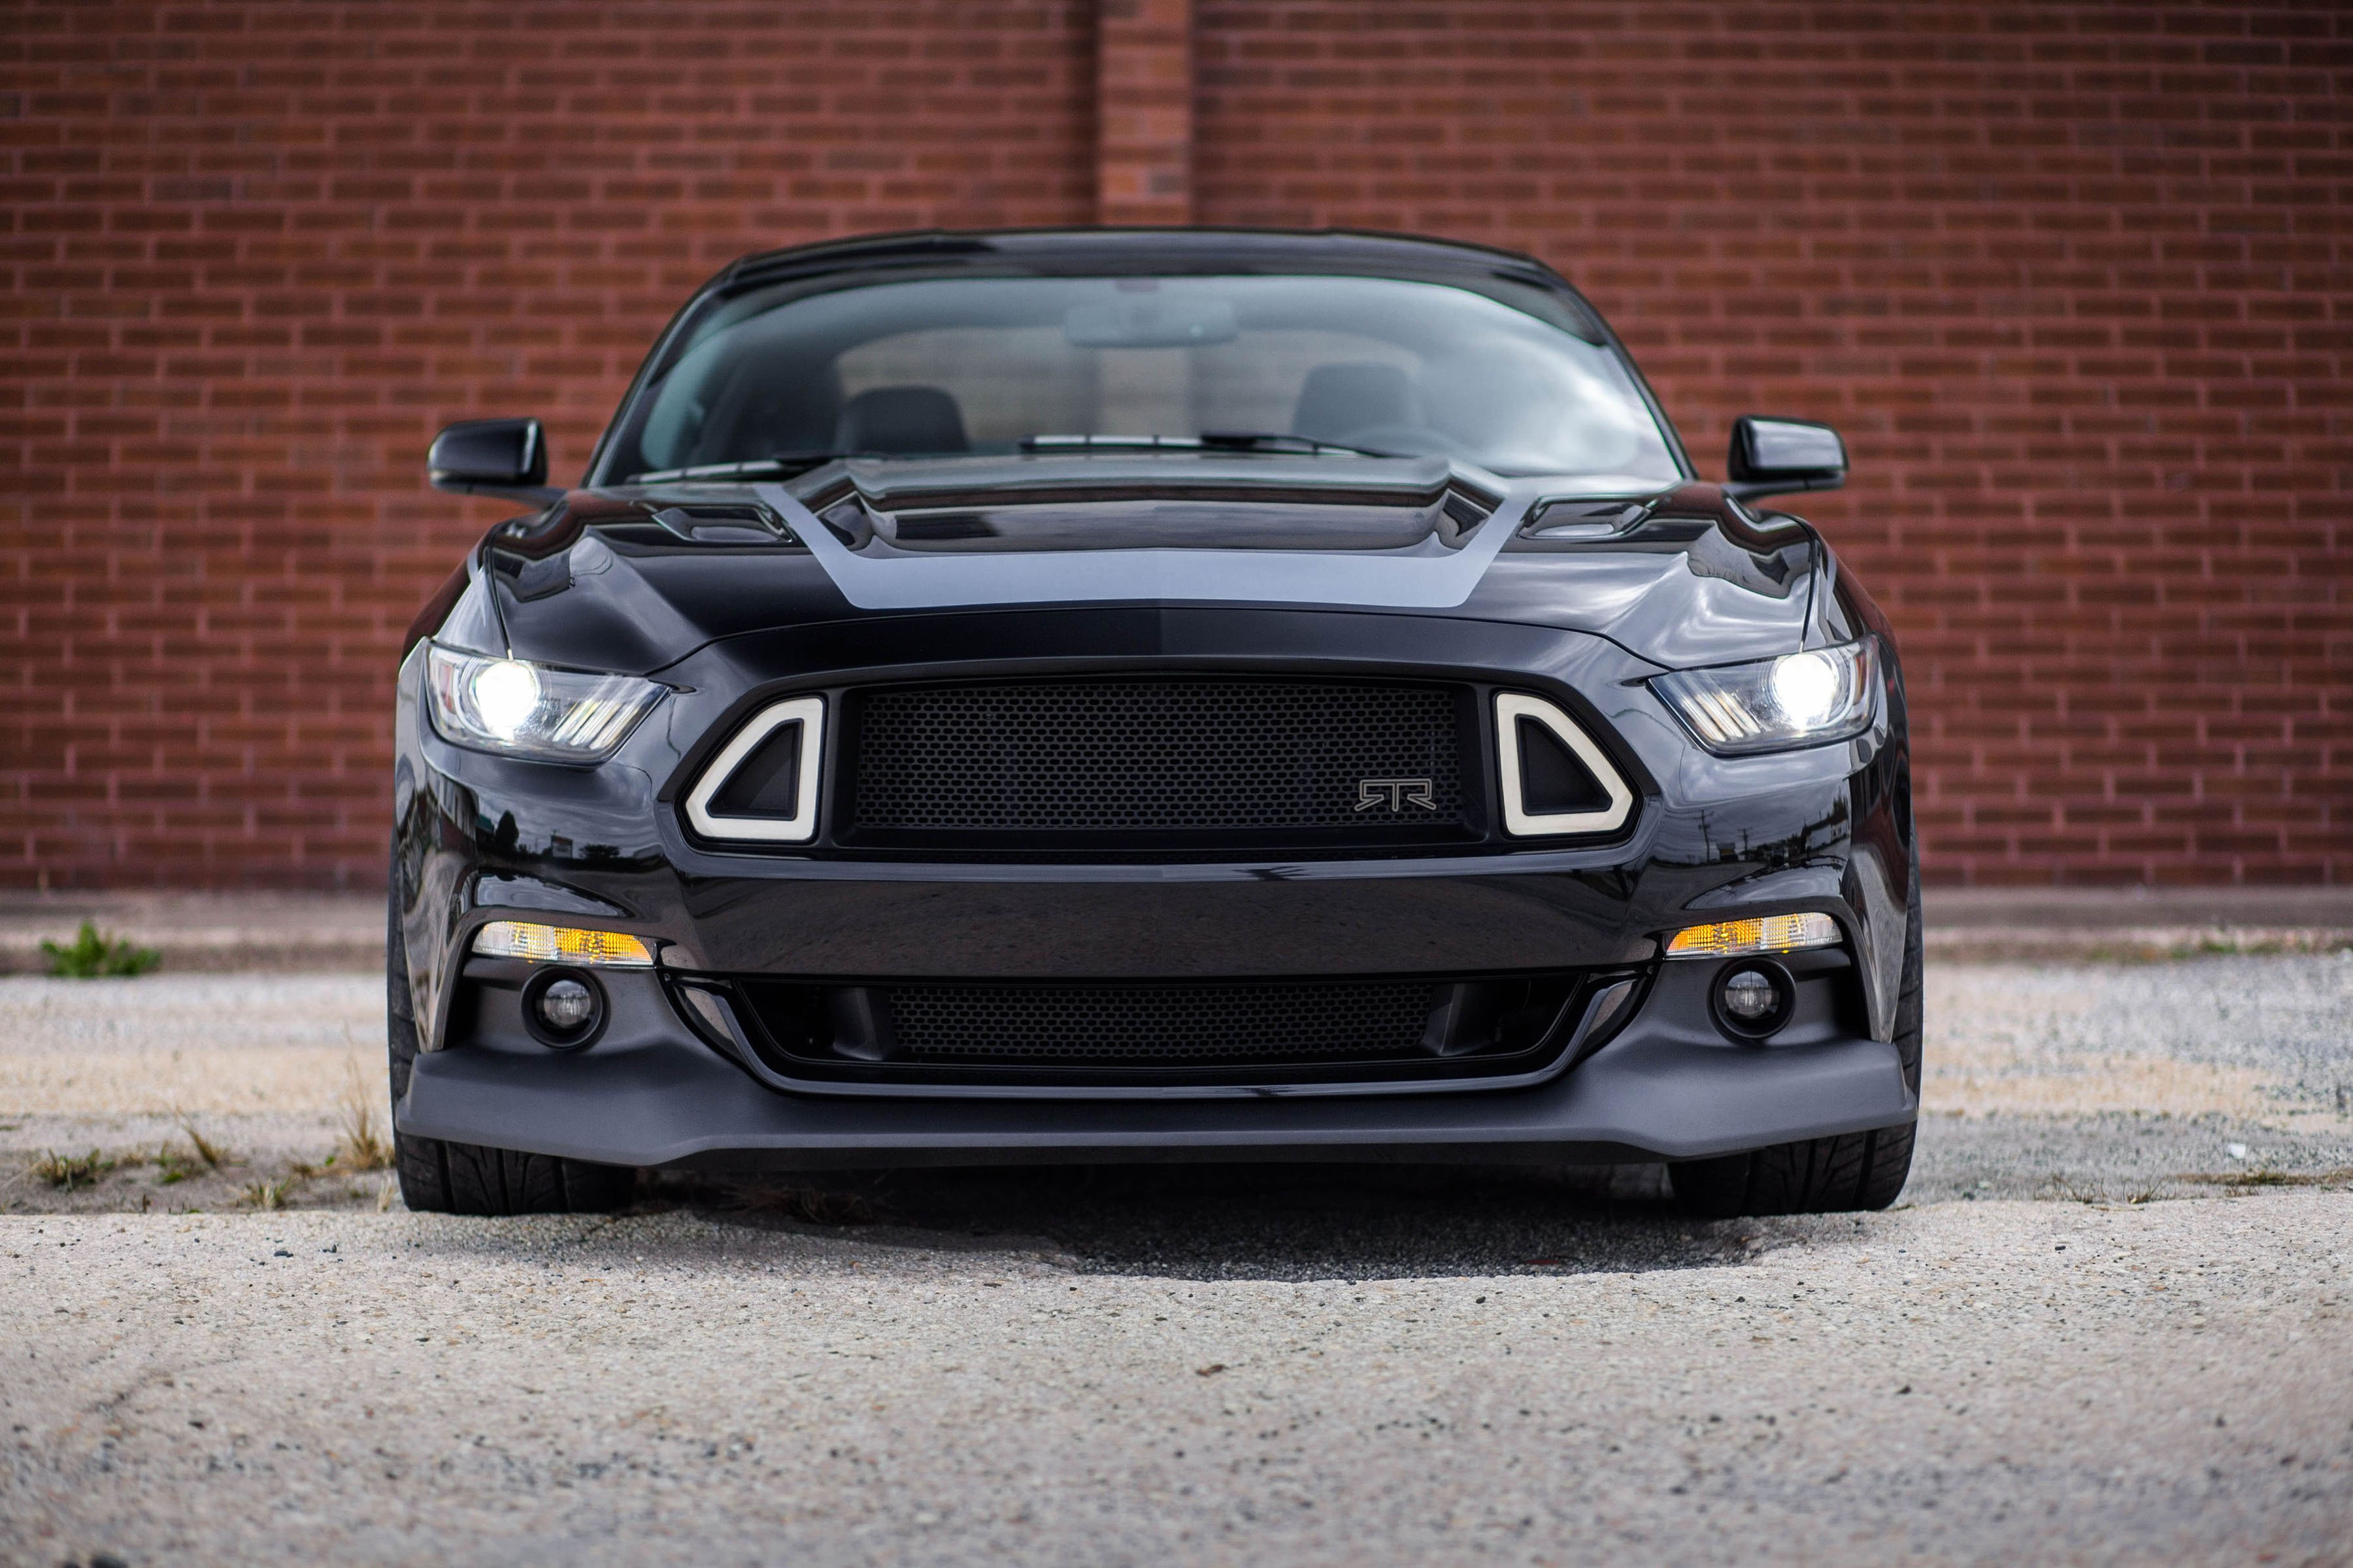 2015, Ford, Mustang, Rtr, Spec 2, Muscle Wallpaper